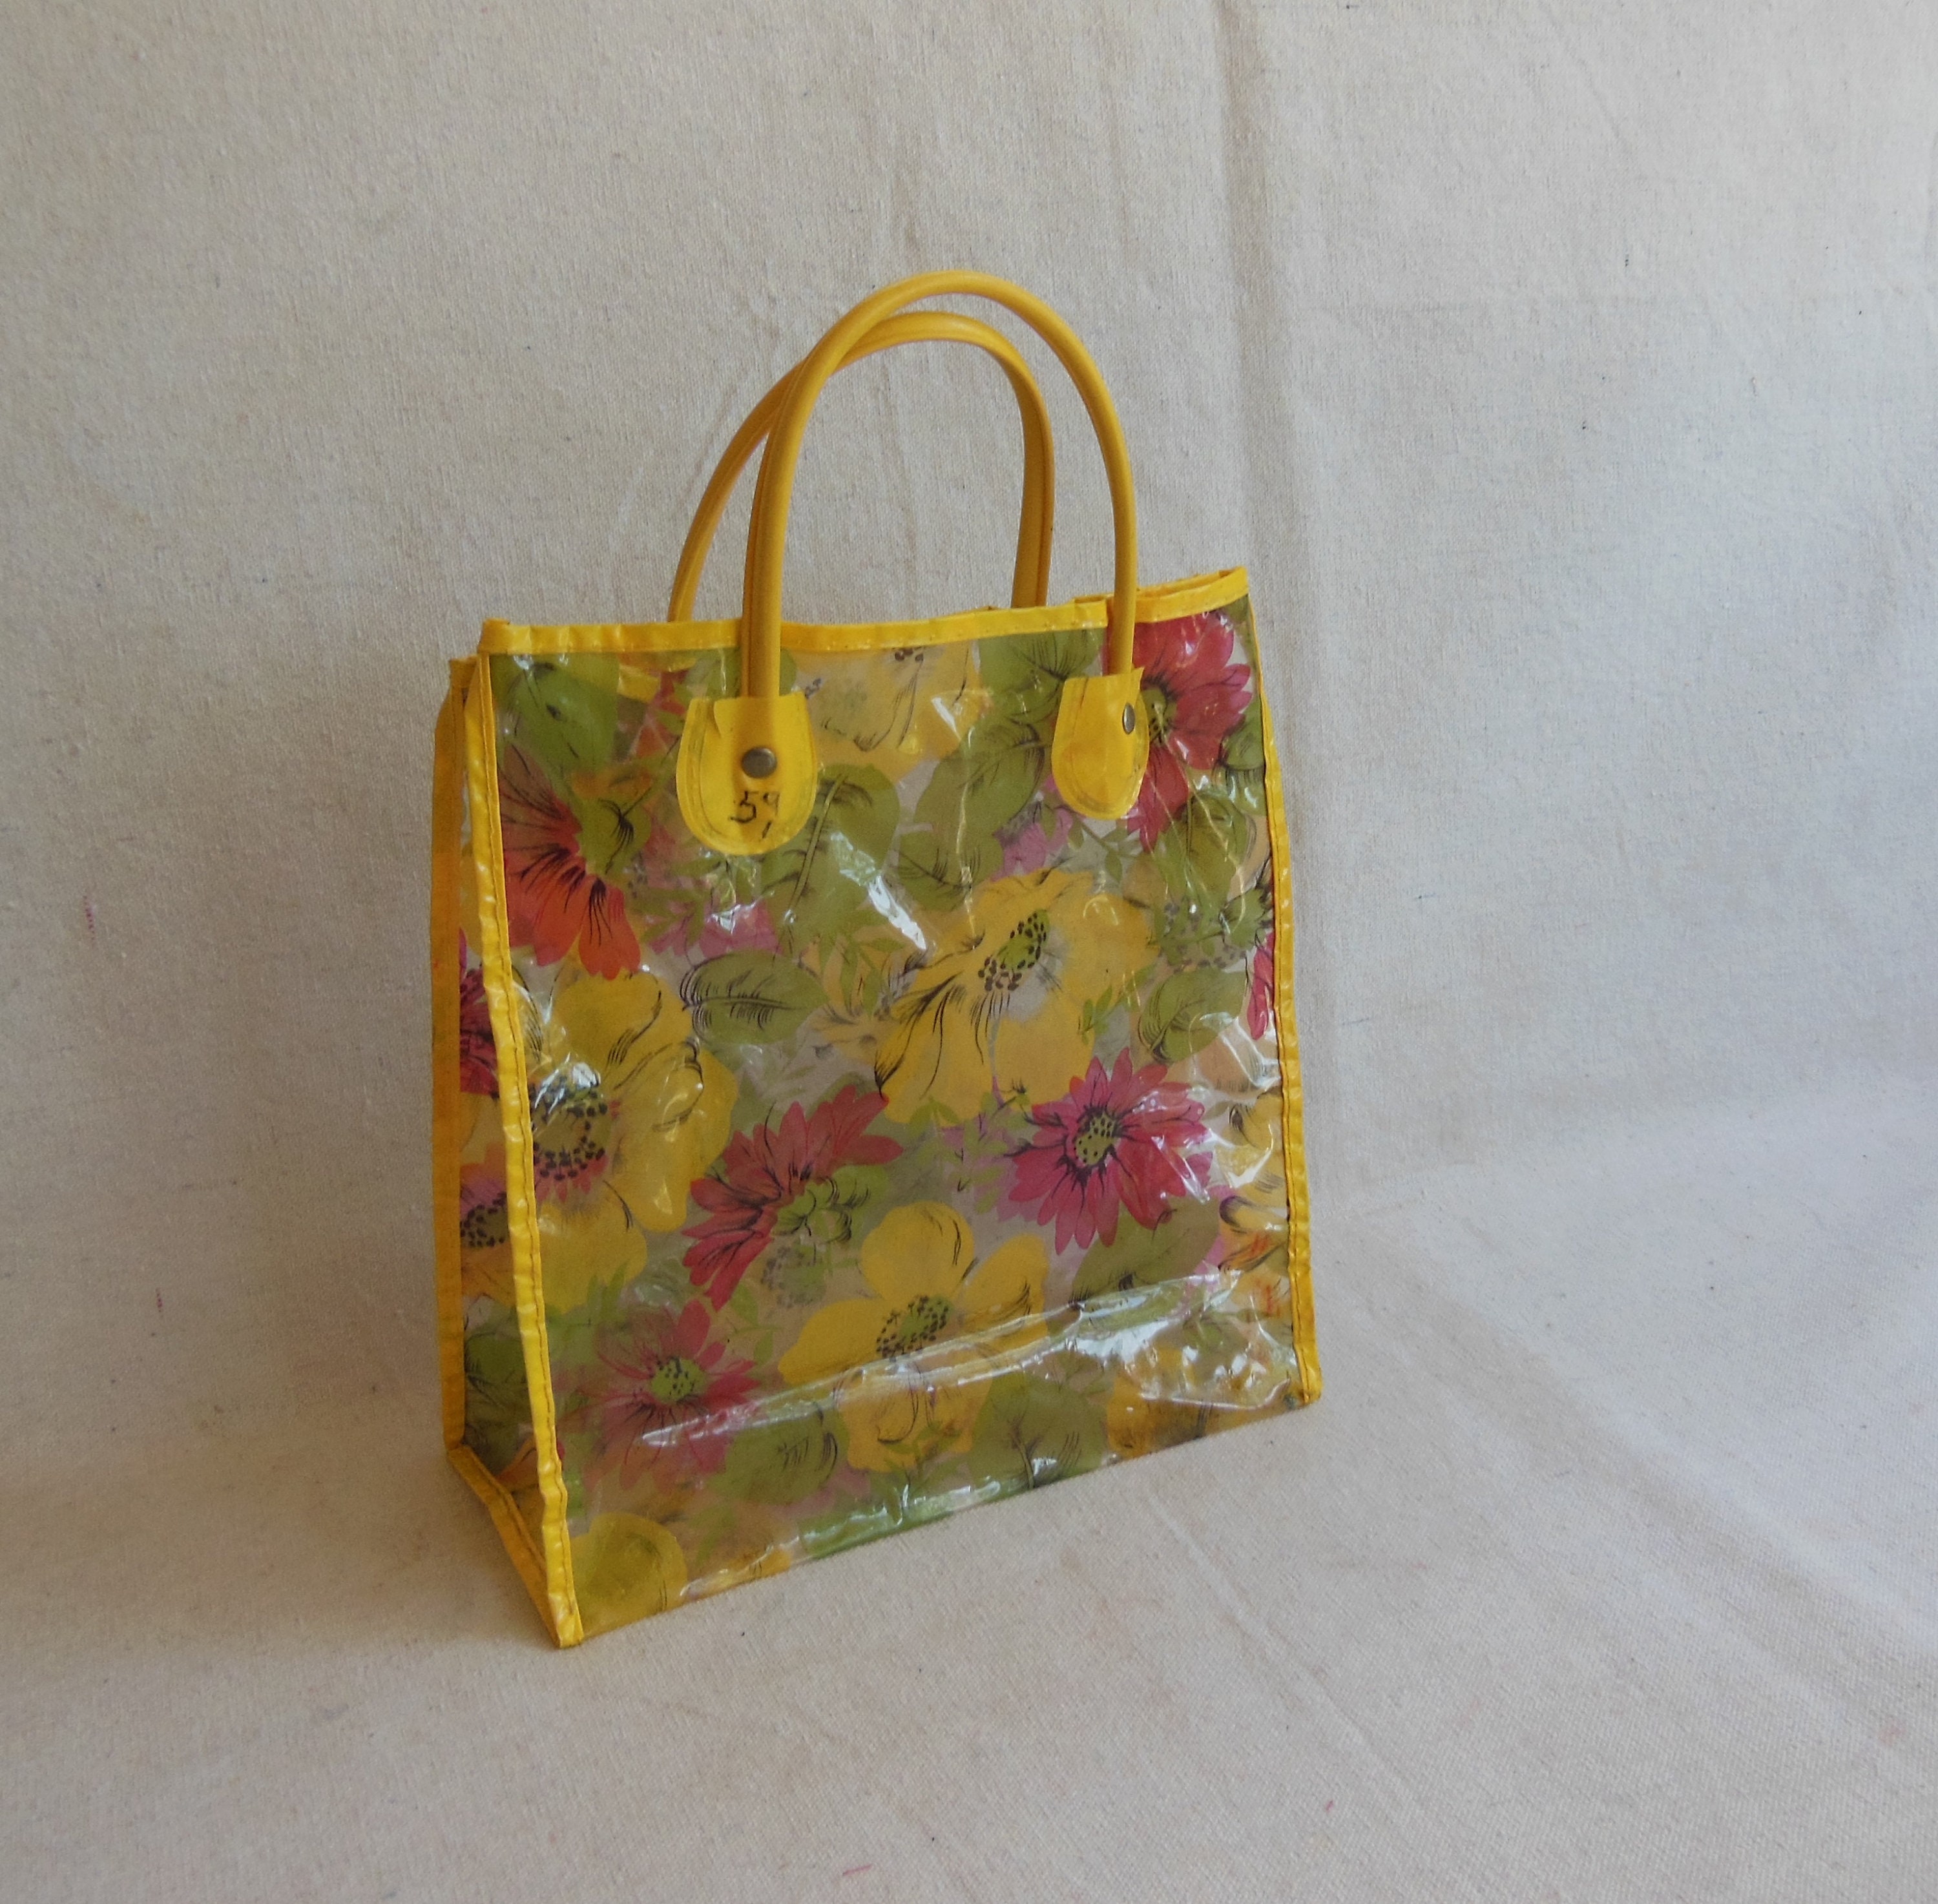 Vintage Goods - Gifts - Clear Vinyl Bags - Floral Items